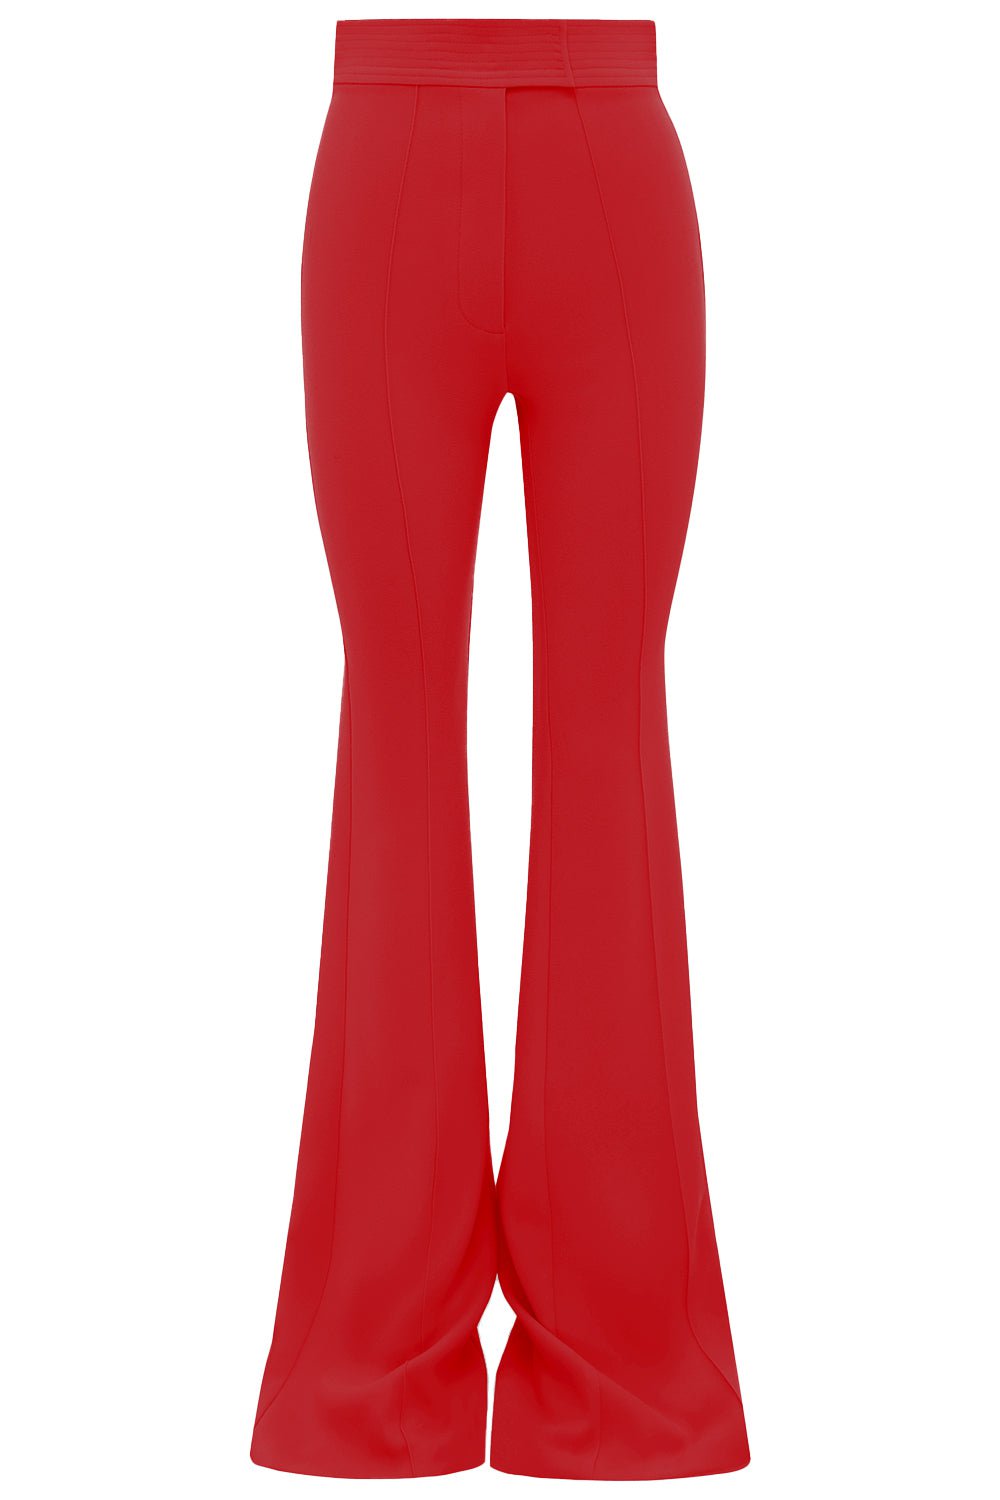 ALEX PERRY-Marden Pant - Red-